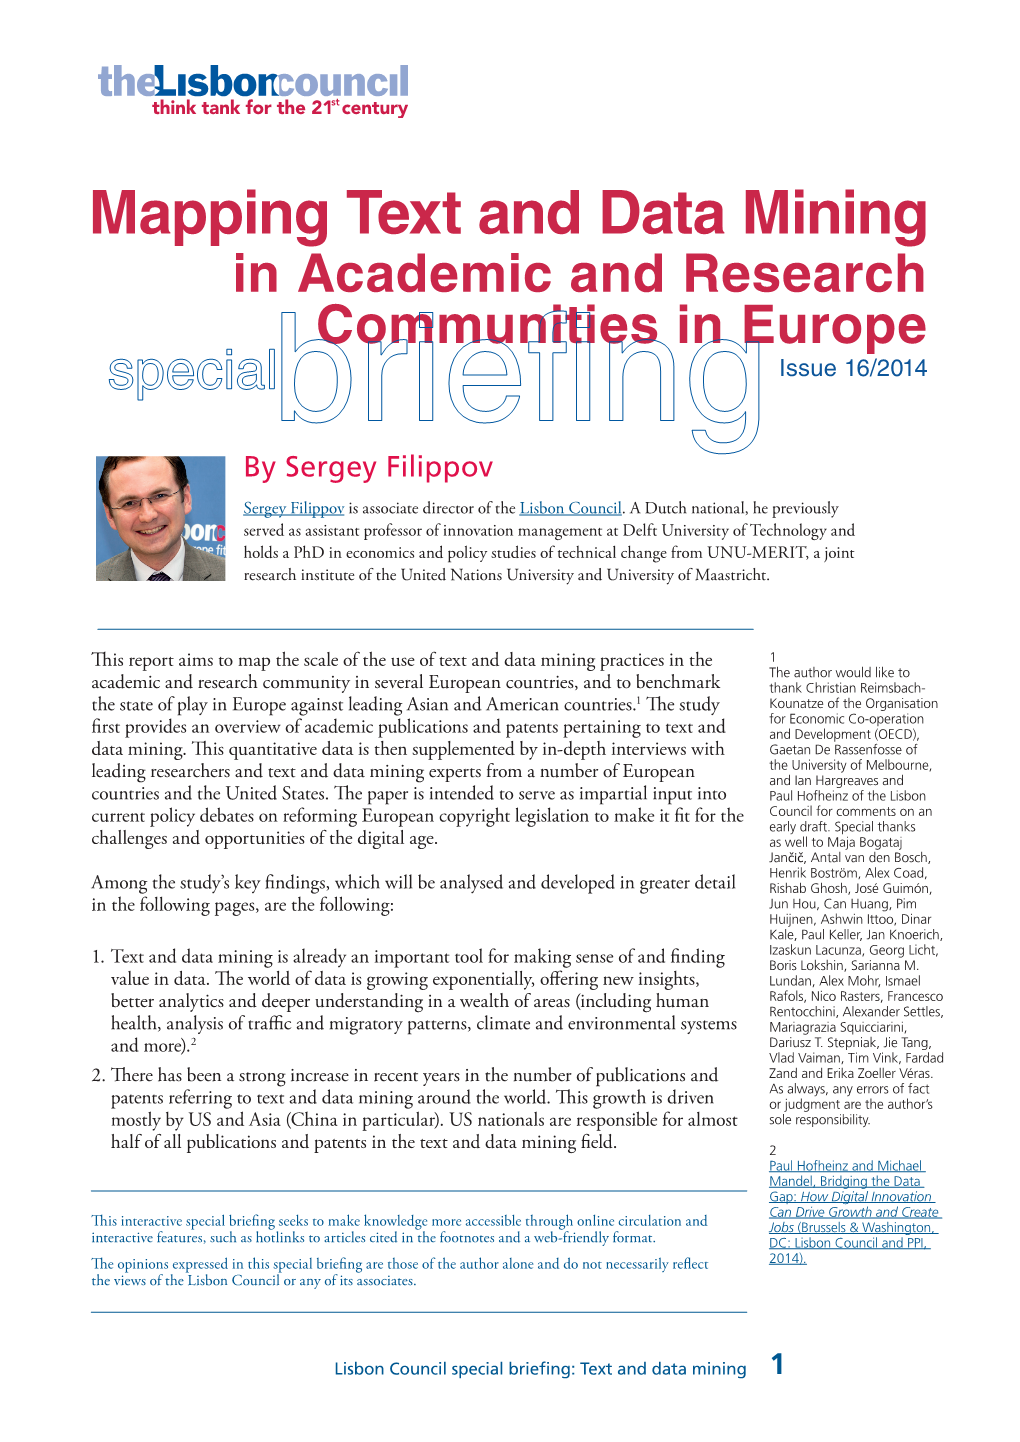 Mapping Text and Data Mining in Academic and Research Communities in Europe Issue 16/2014